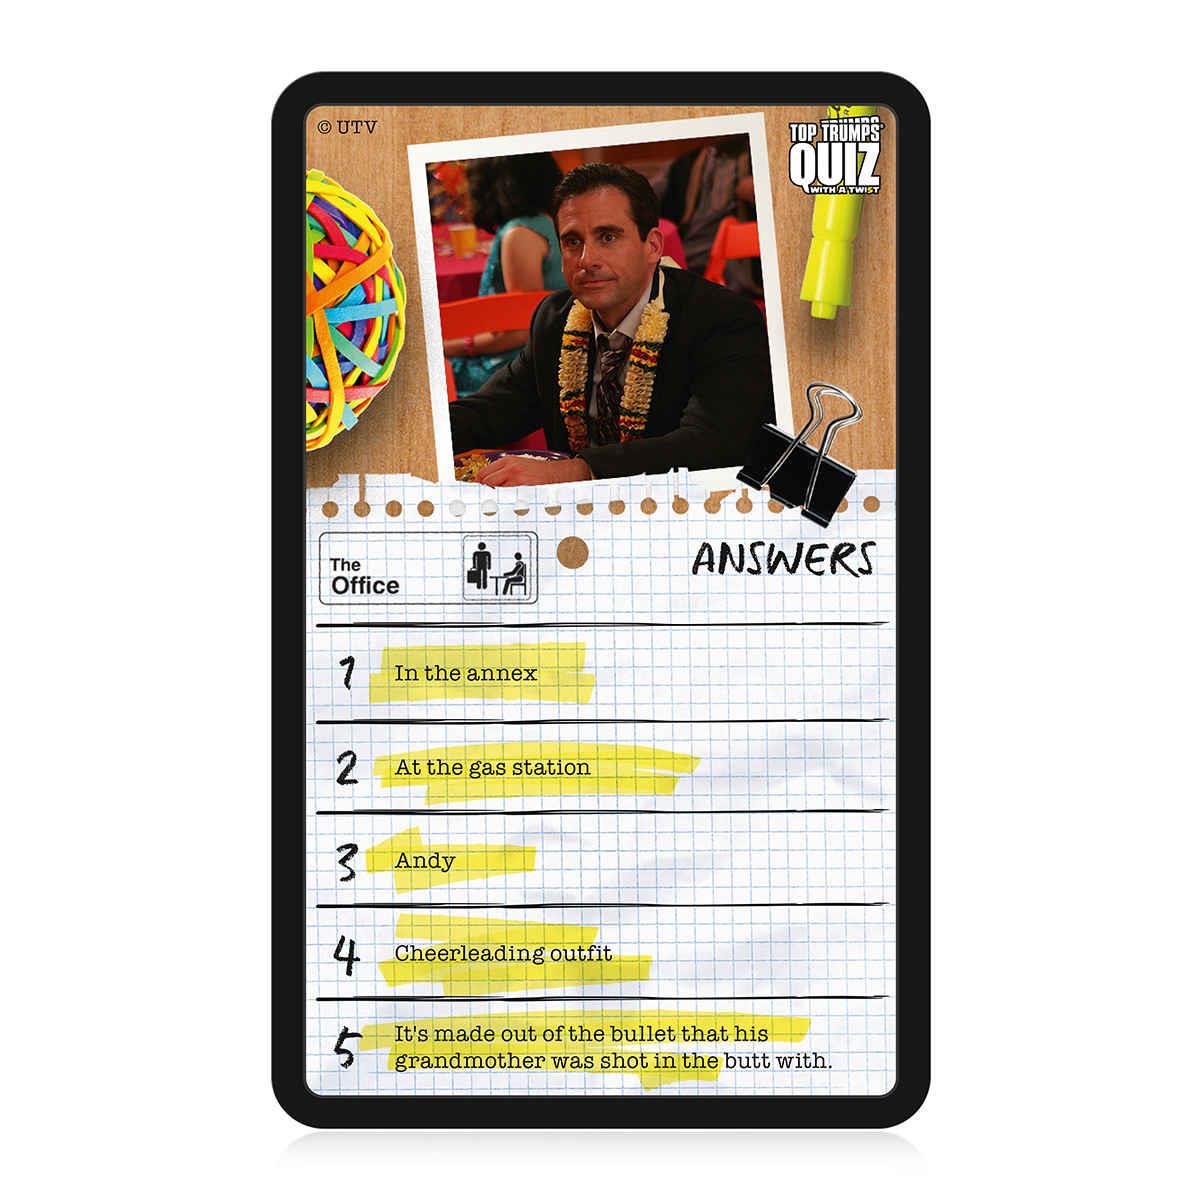 The Office (US) Top Trumps Quiz Card Game